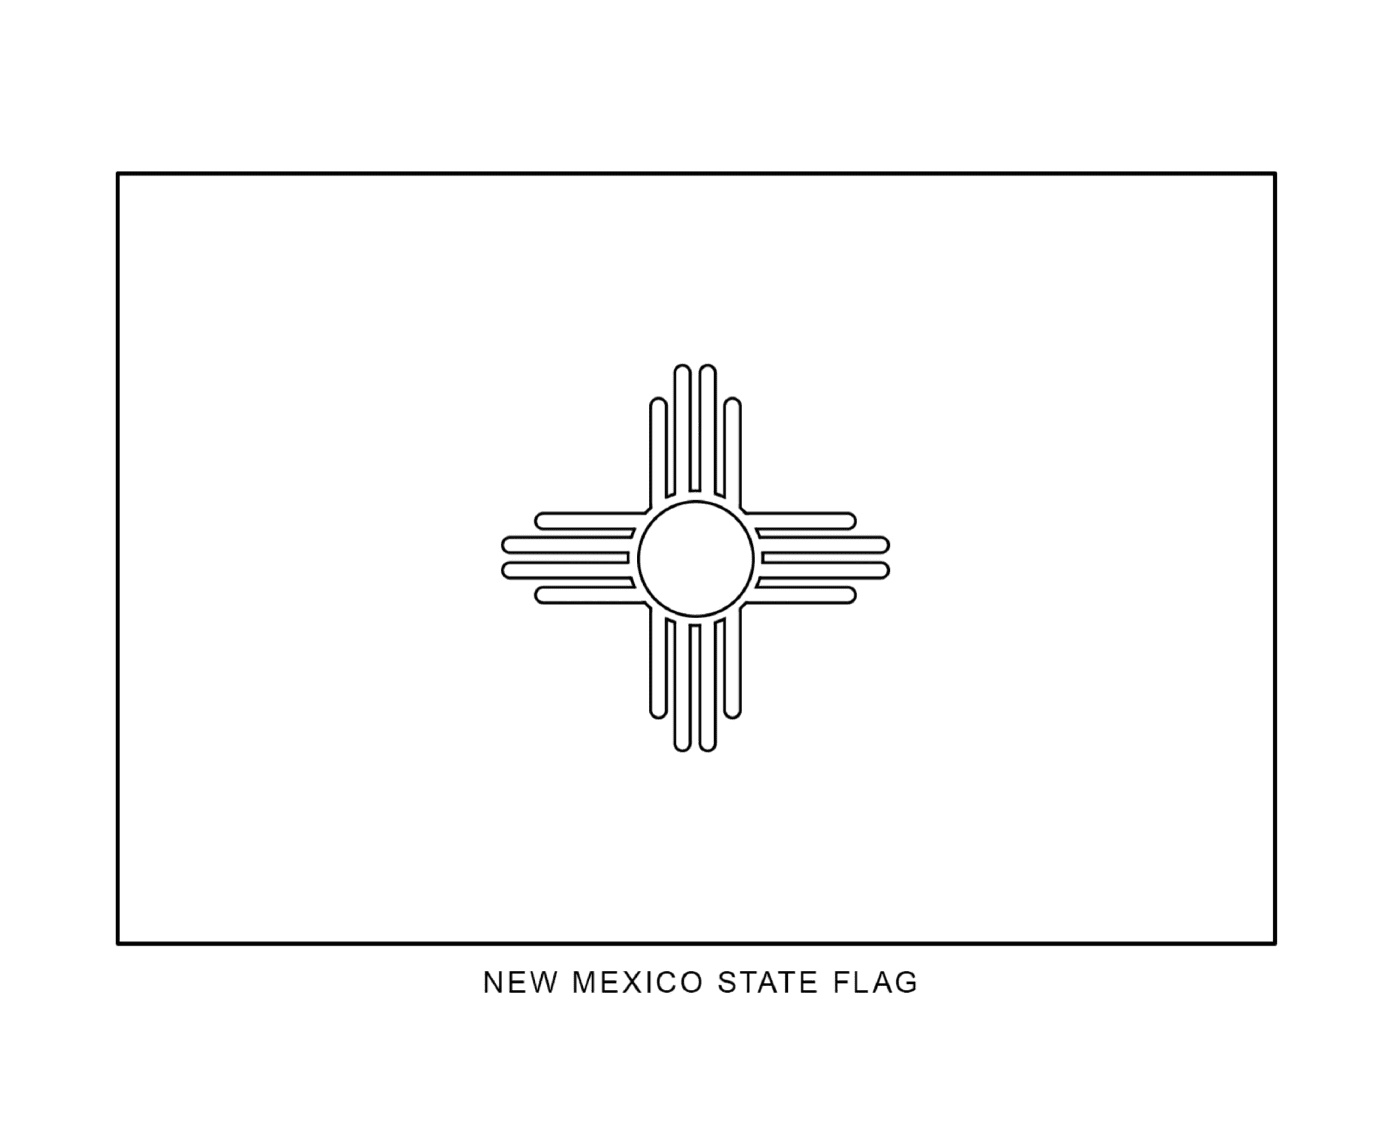  Flag of the State of New Mexico in black and white 